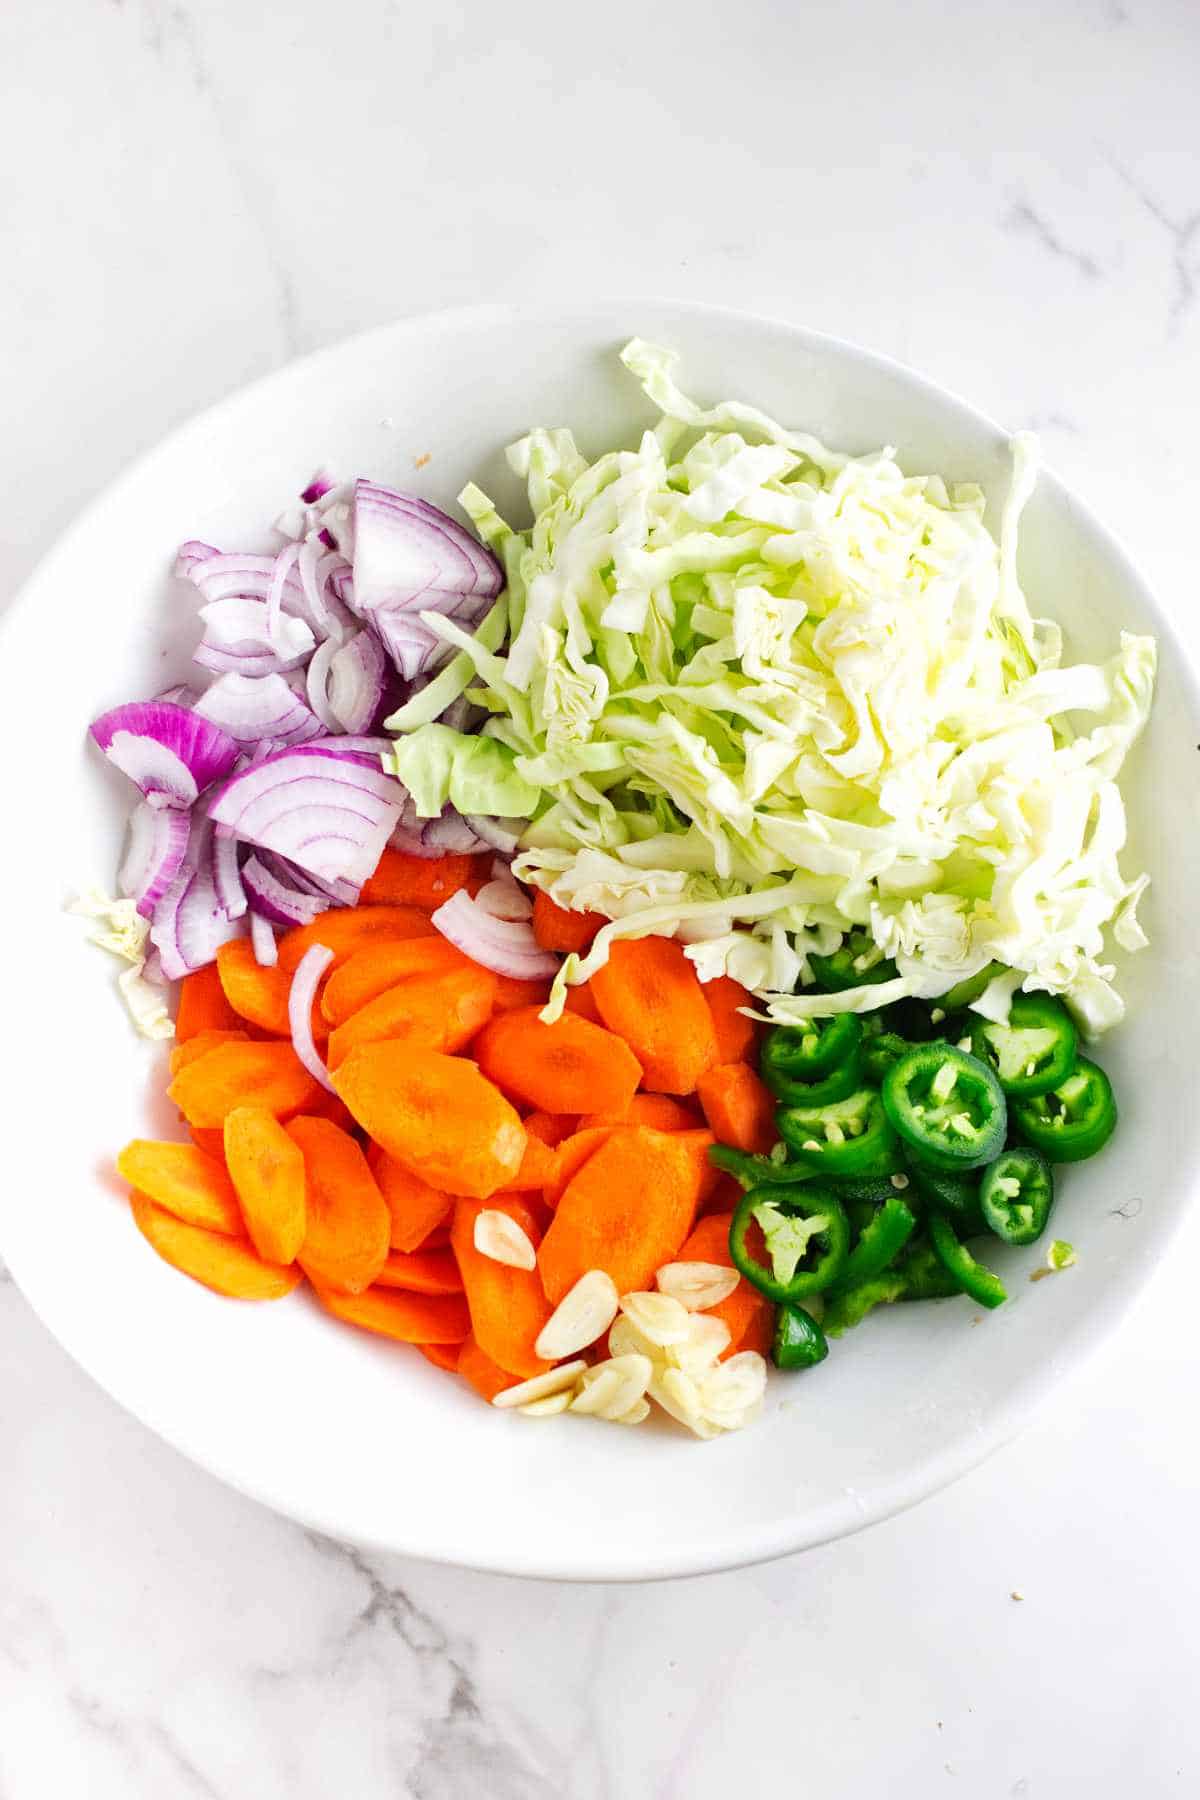 shredded cabbage, diagonally sliced carrots, jalapeno coins, quarter sliced onions and slivered garlic in a large shallow bowl.